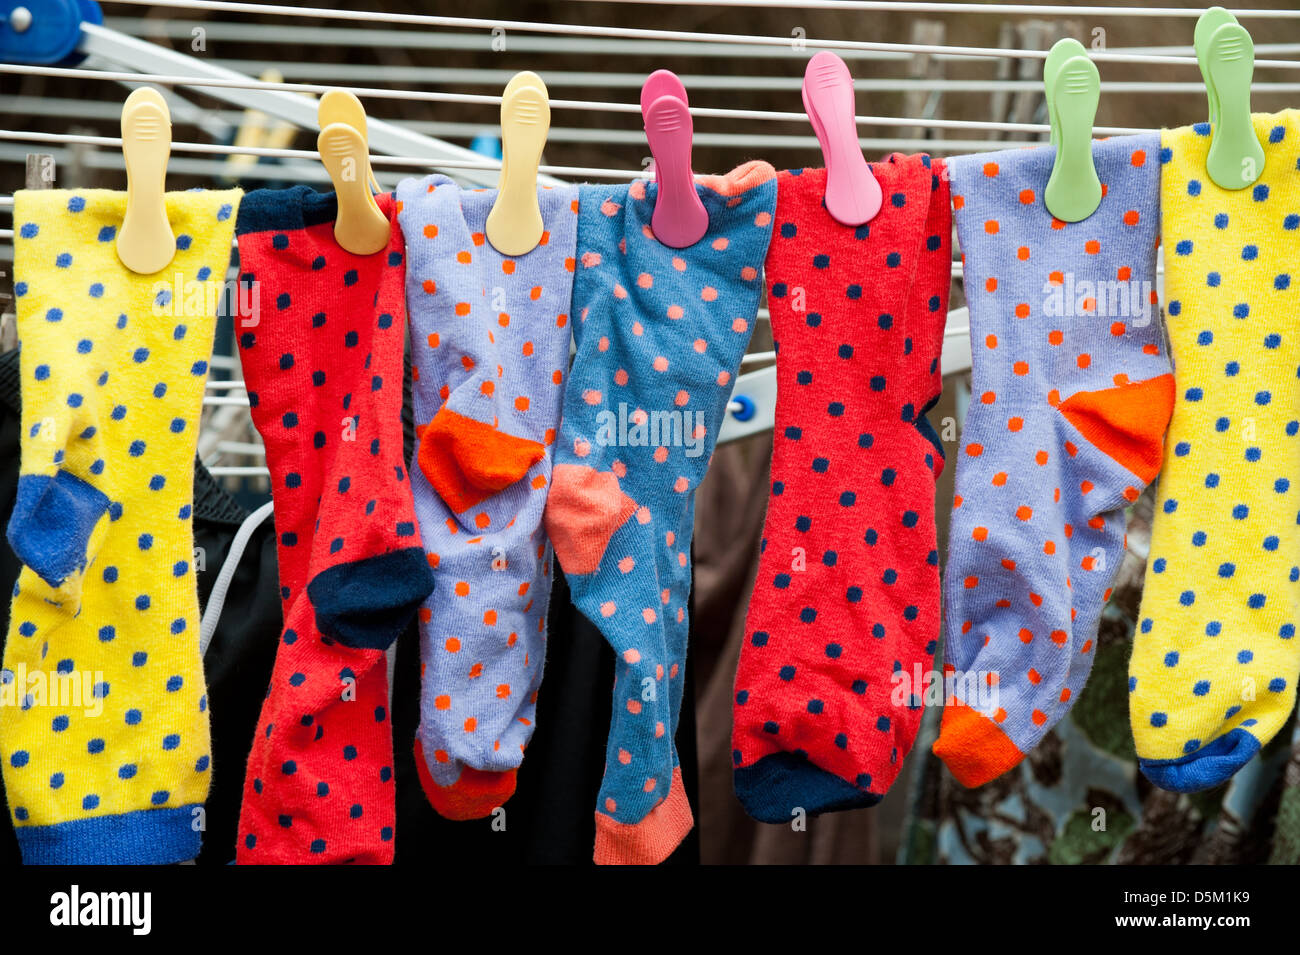 Colourful socks hanging on the washing line Stock Photo